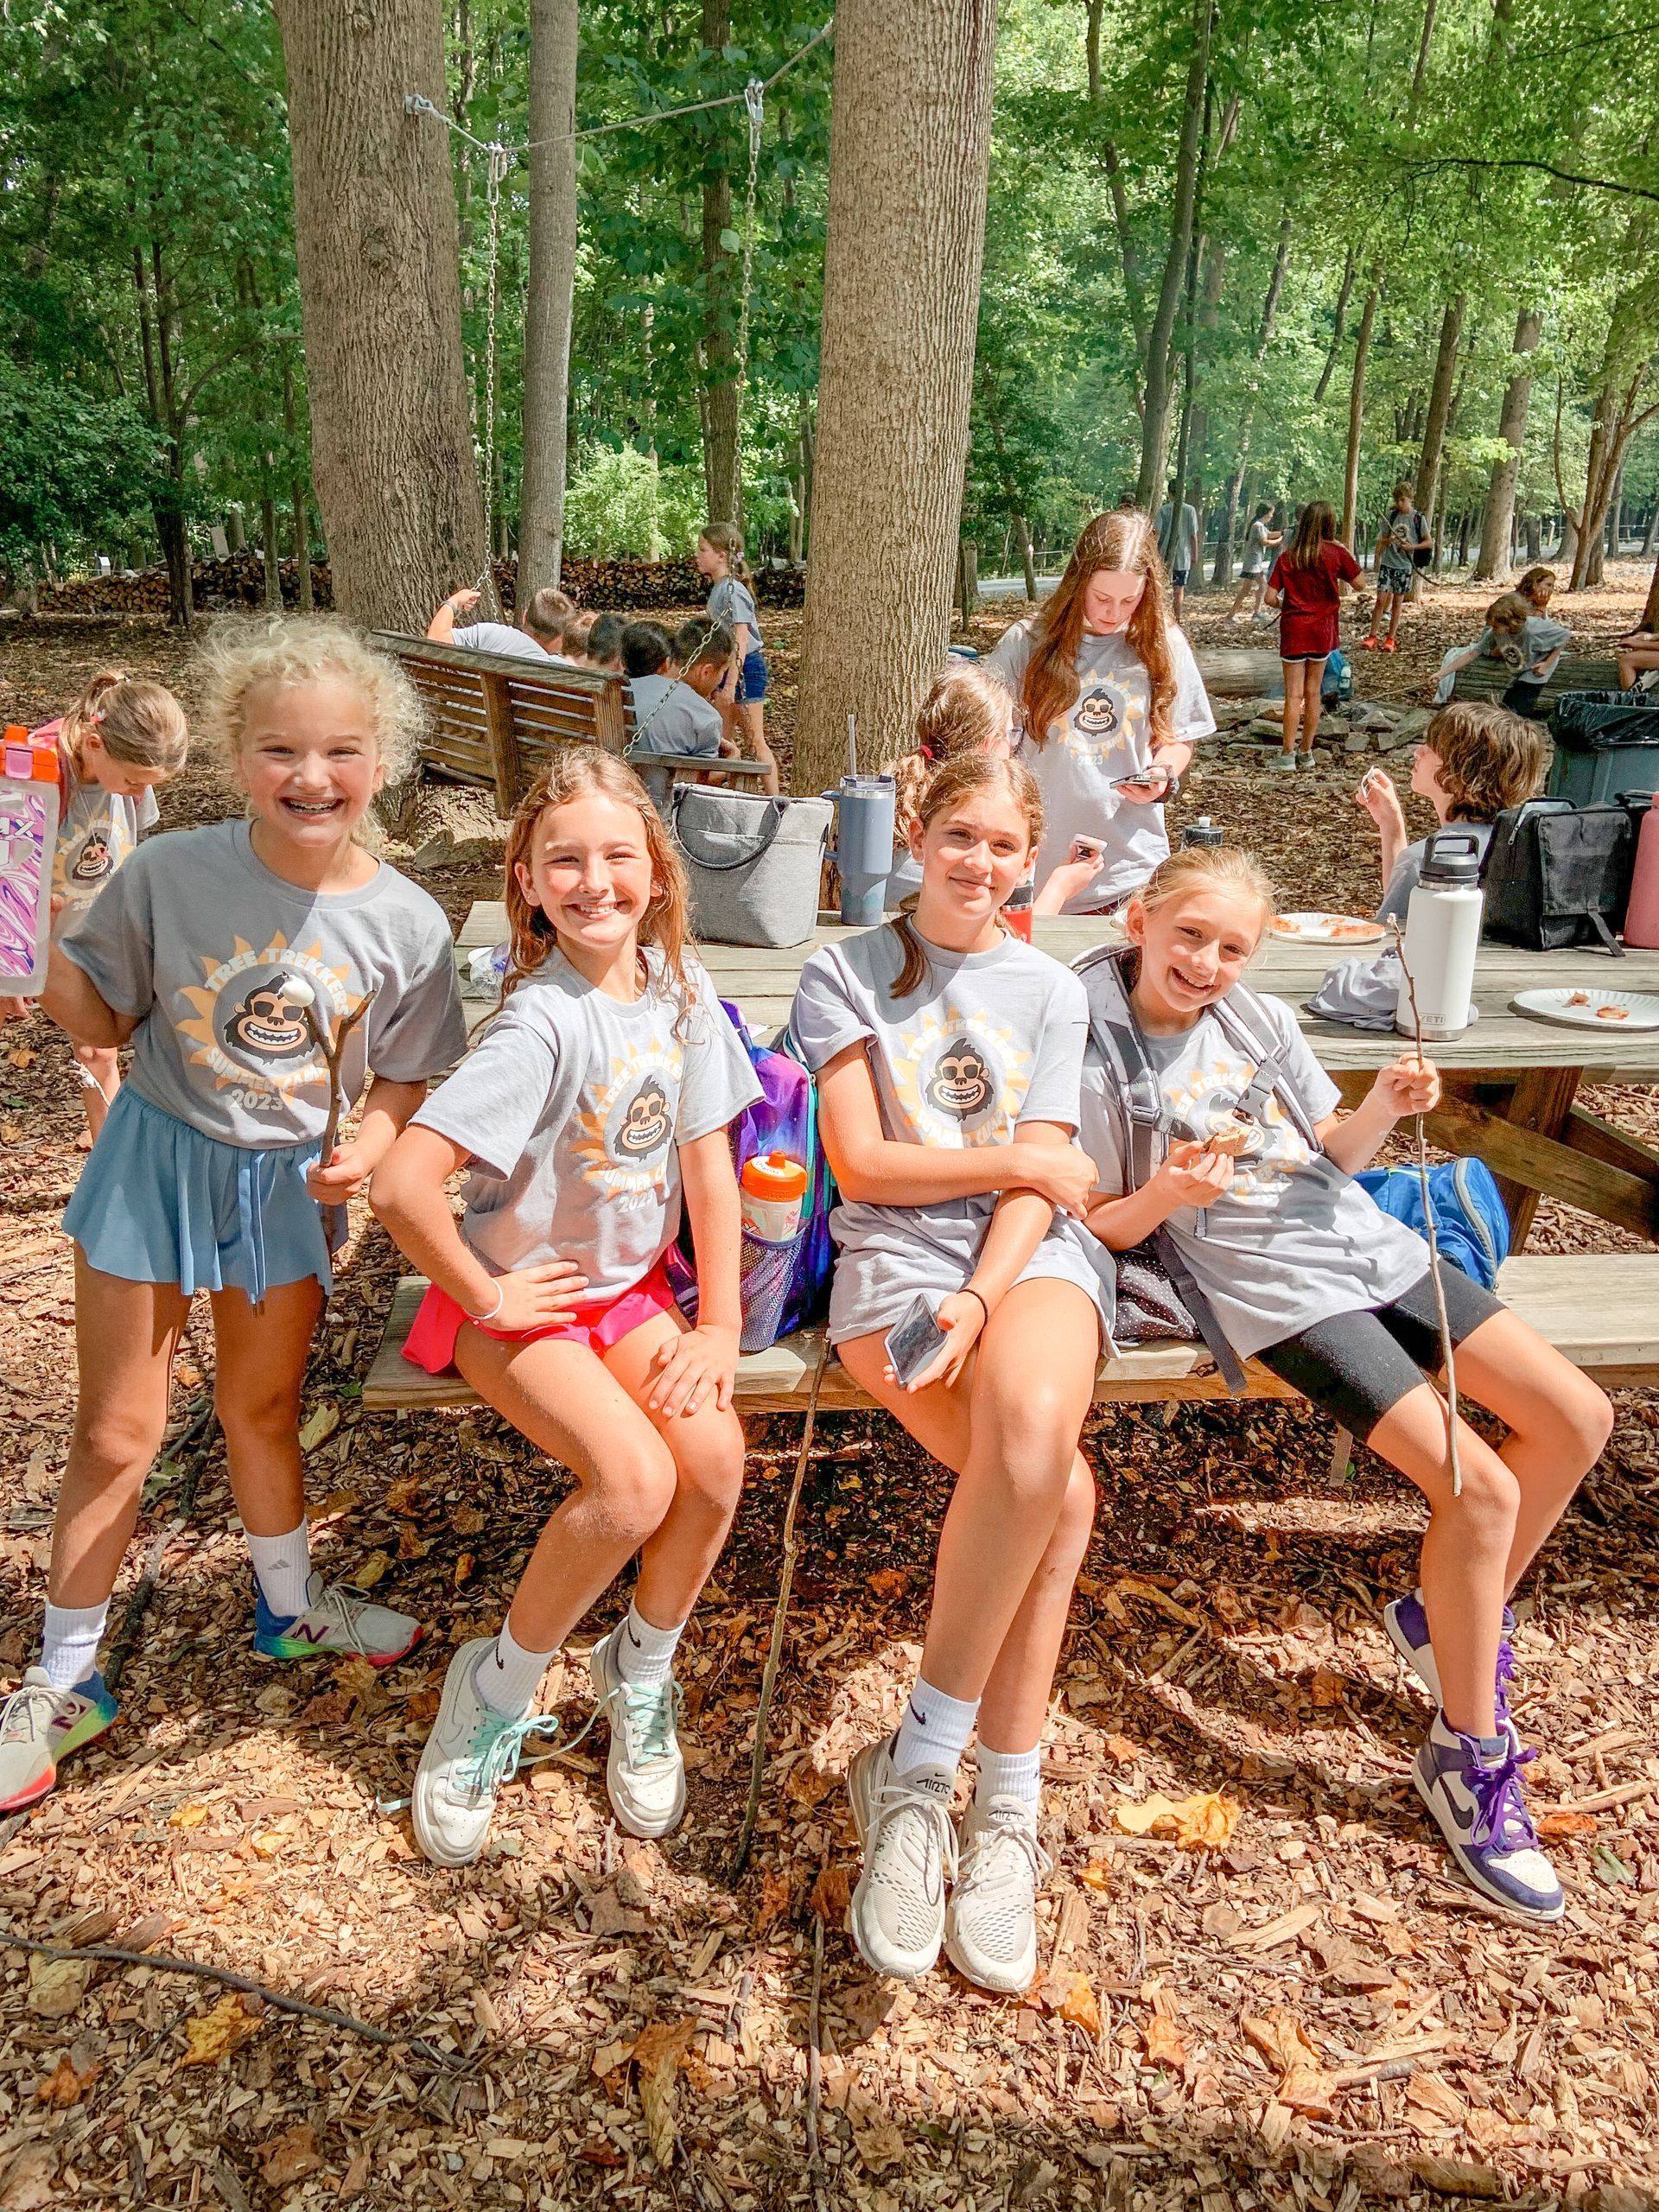 Campers eating smore's at summer camp